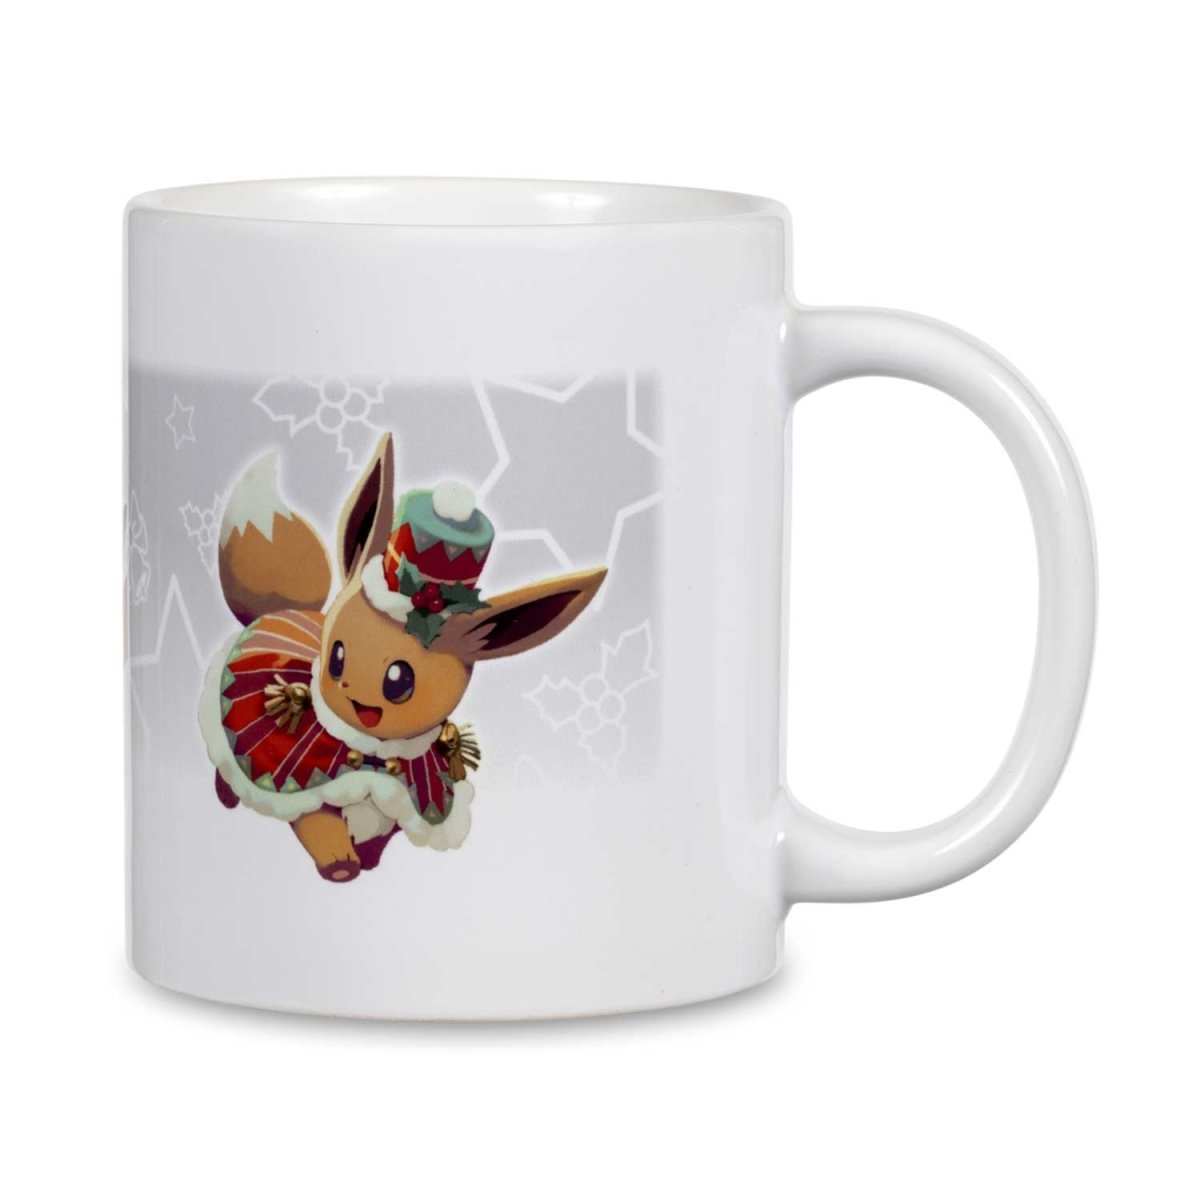 The Best Pokémon for the Holiday Cup